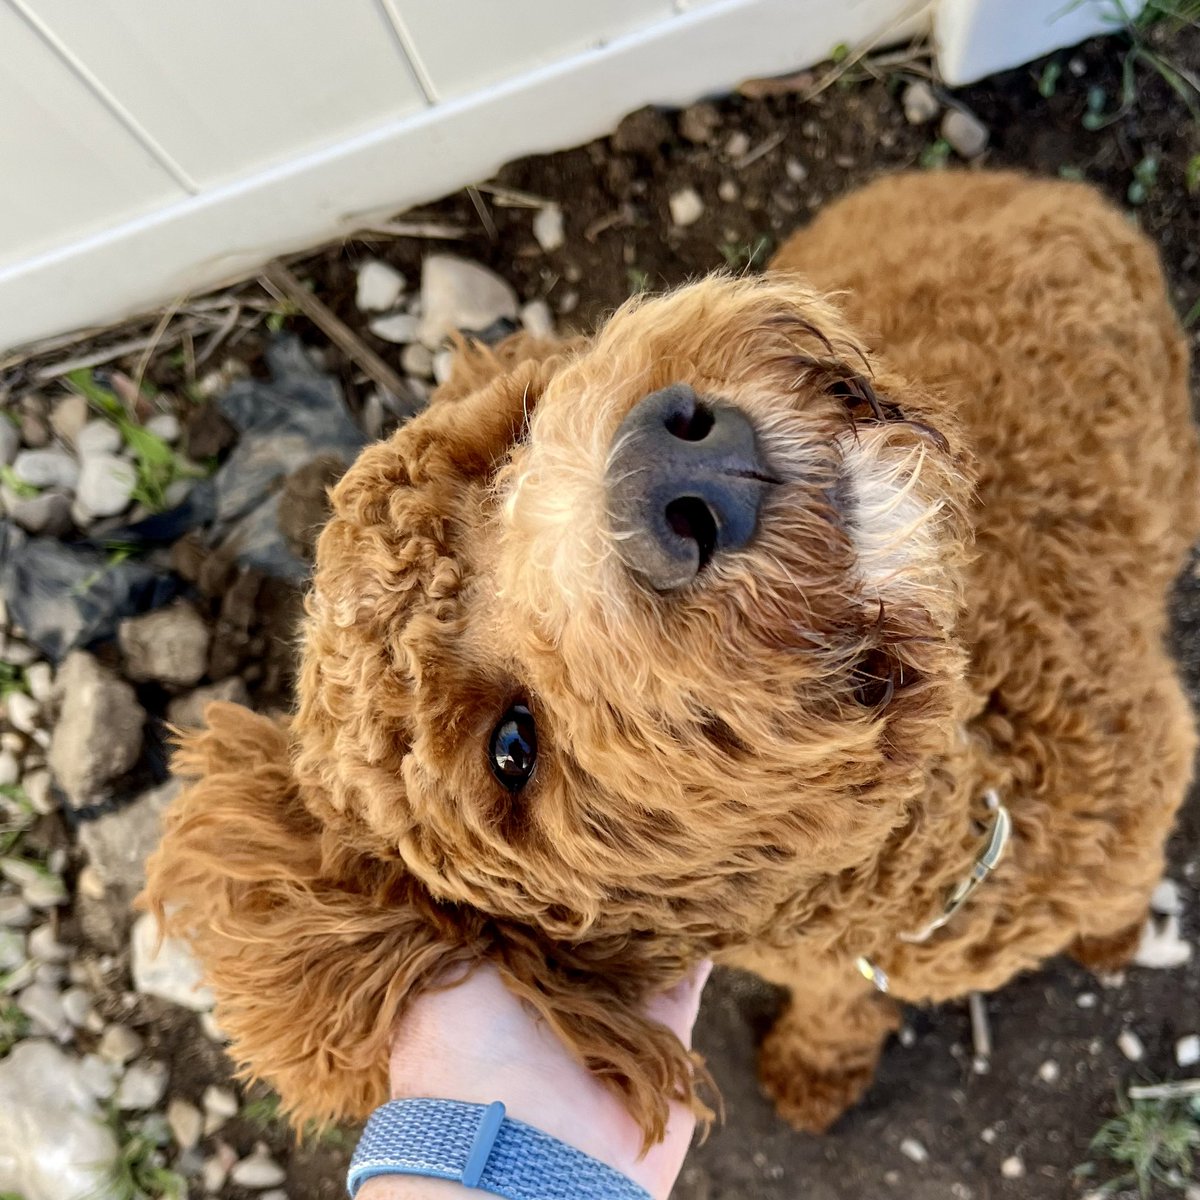 Clover wants you to know that after lunch ear scritches in the garden are the best ear scritches.